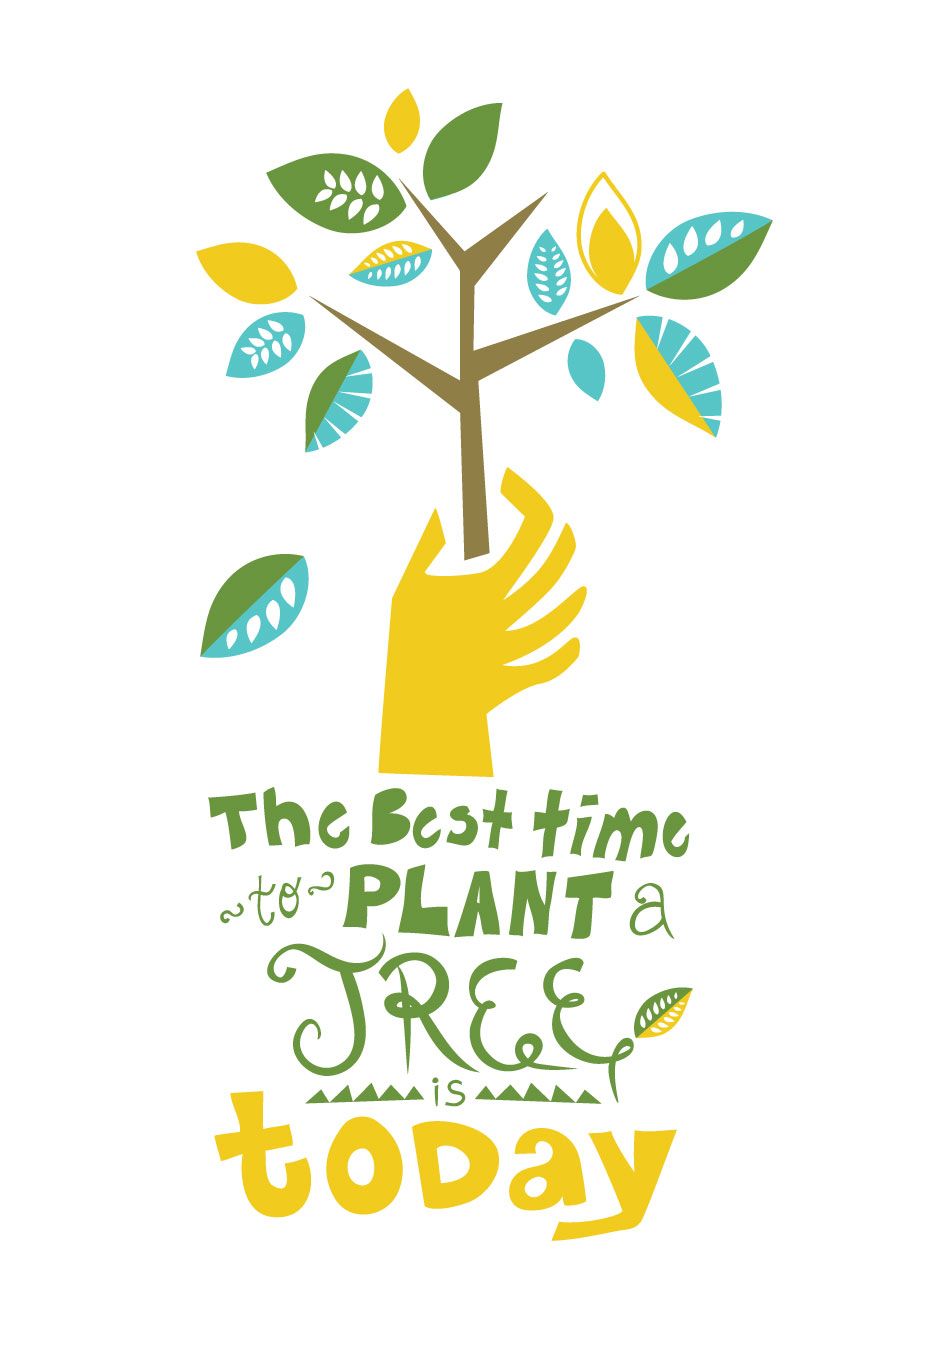 Plant a Tree poster Designed by Leah Wiegmann